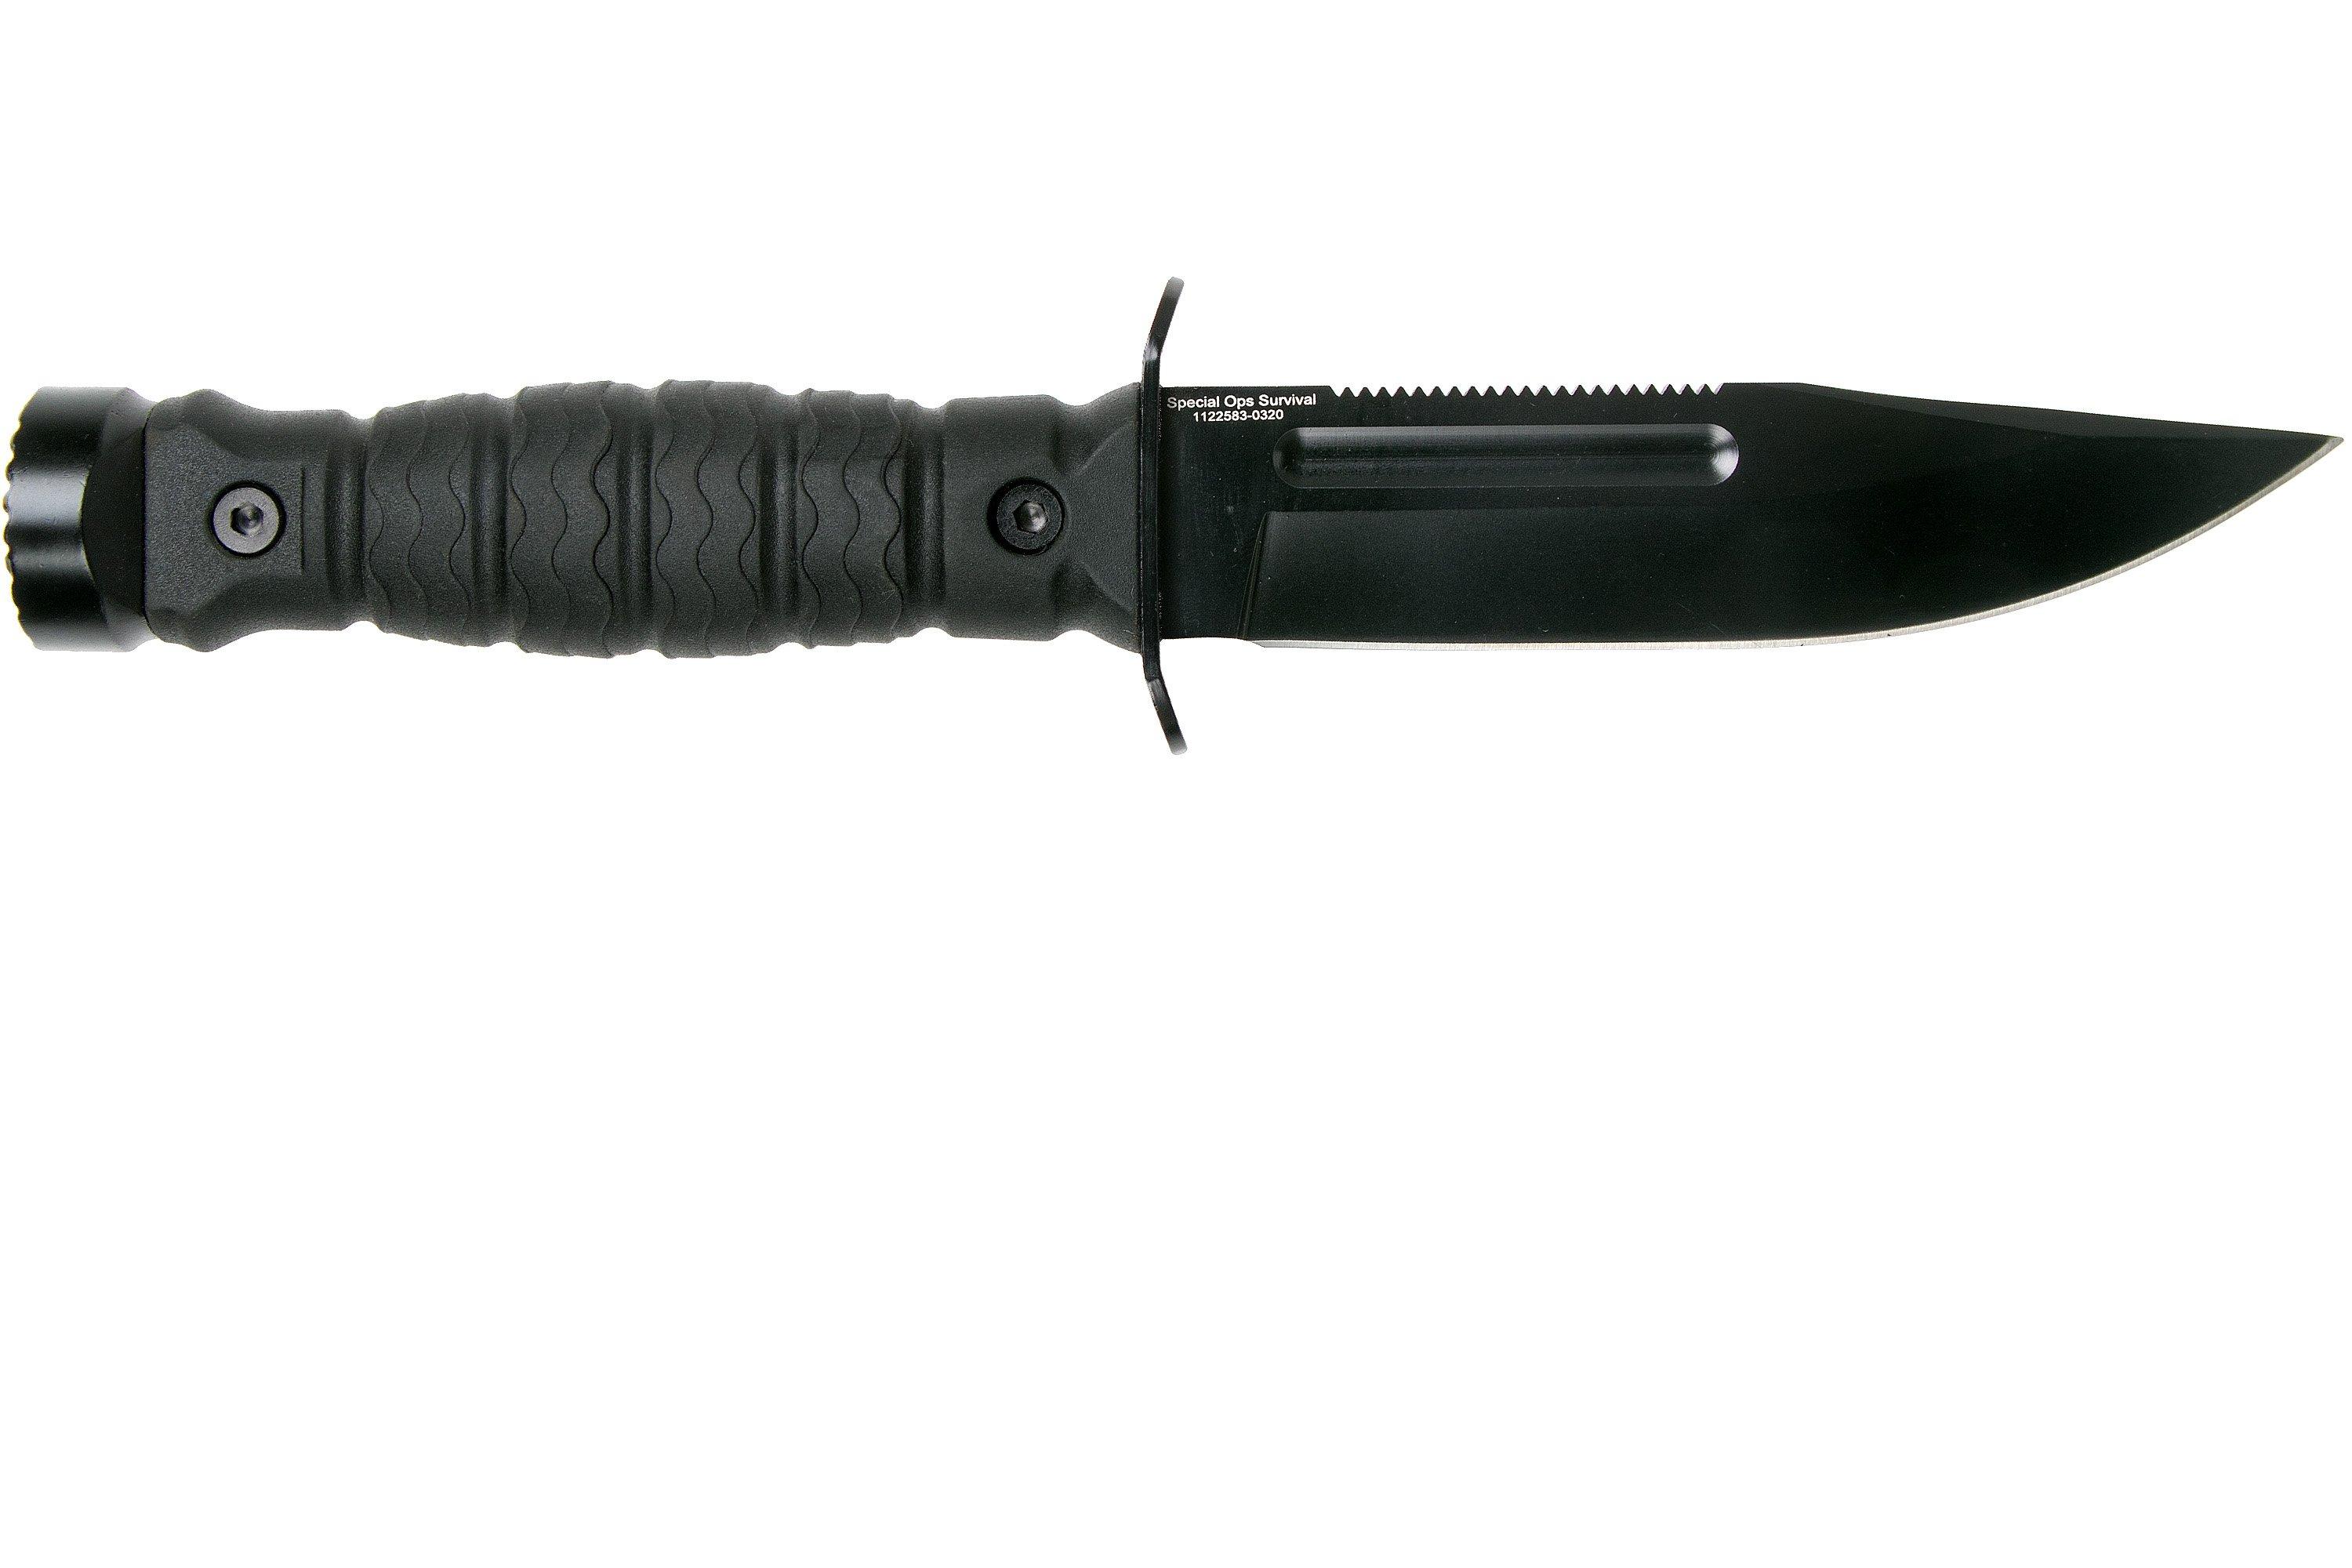 Smith & M&P Special Ops Ultimate Knife 5” 122583 survival knife | Advantageously shopping Knivesandtools.com